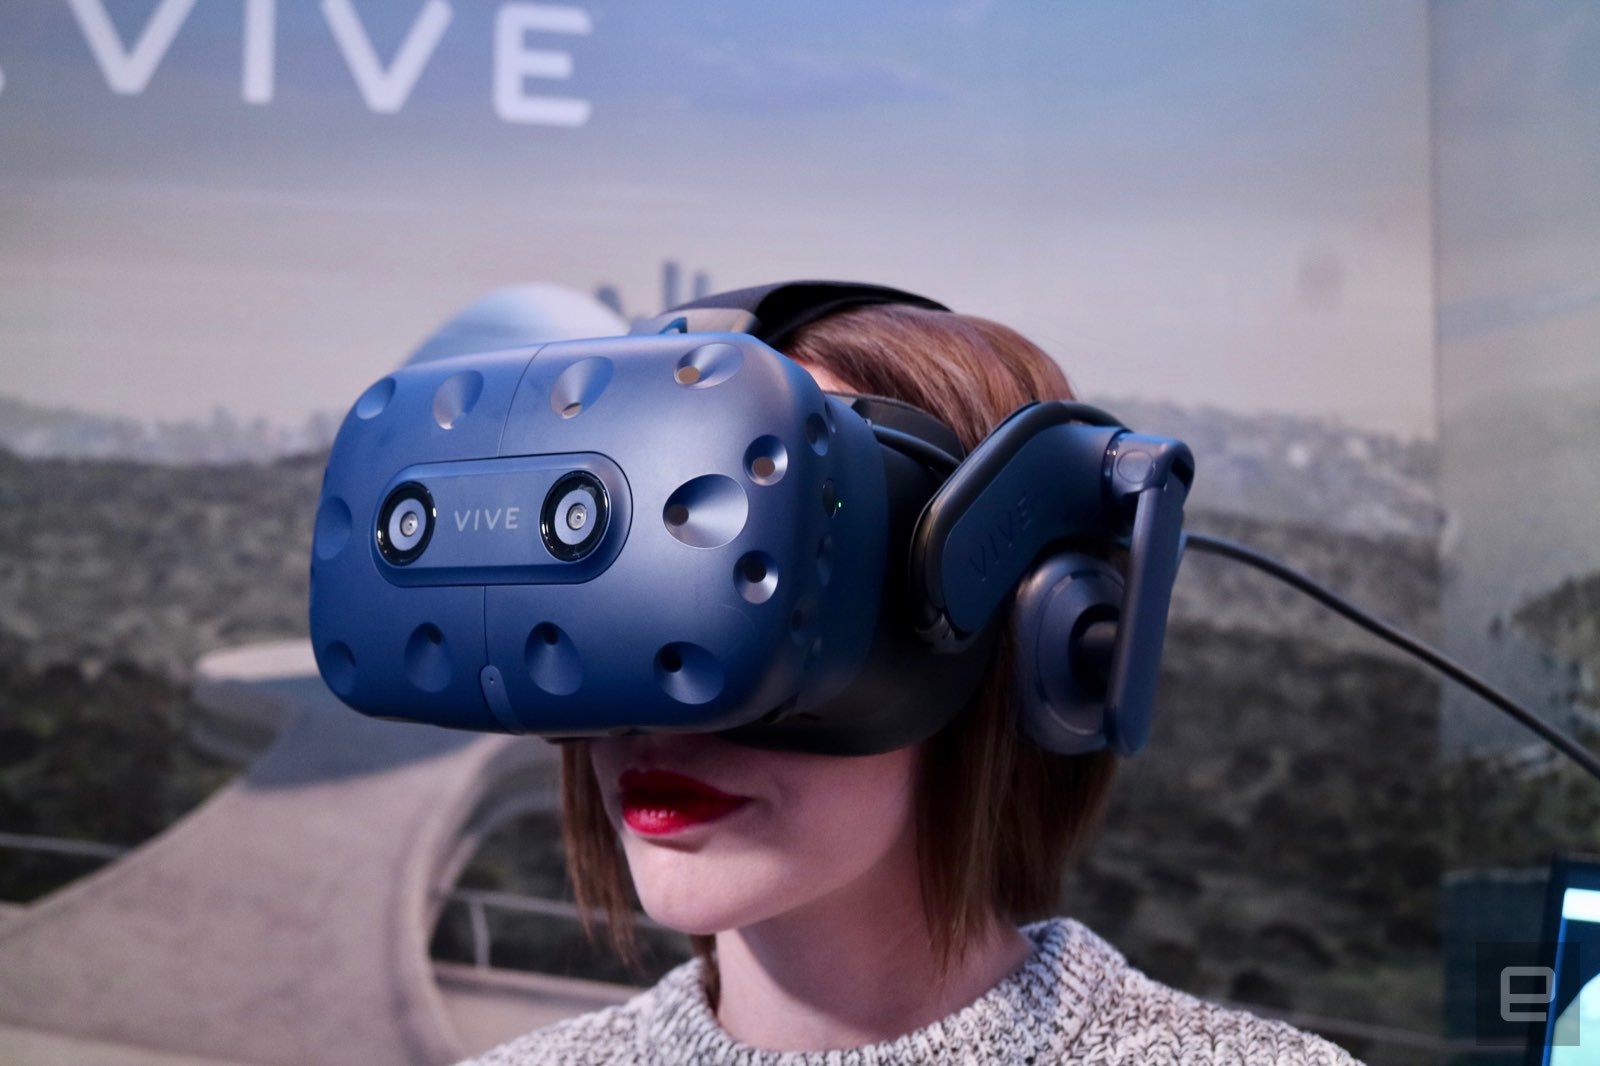 HTC's Vive Pro headset is available to pre-order for $799 | DeviceDaily.com